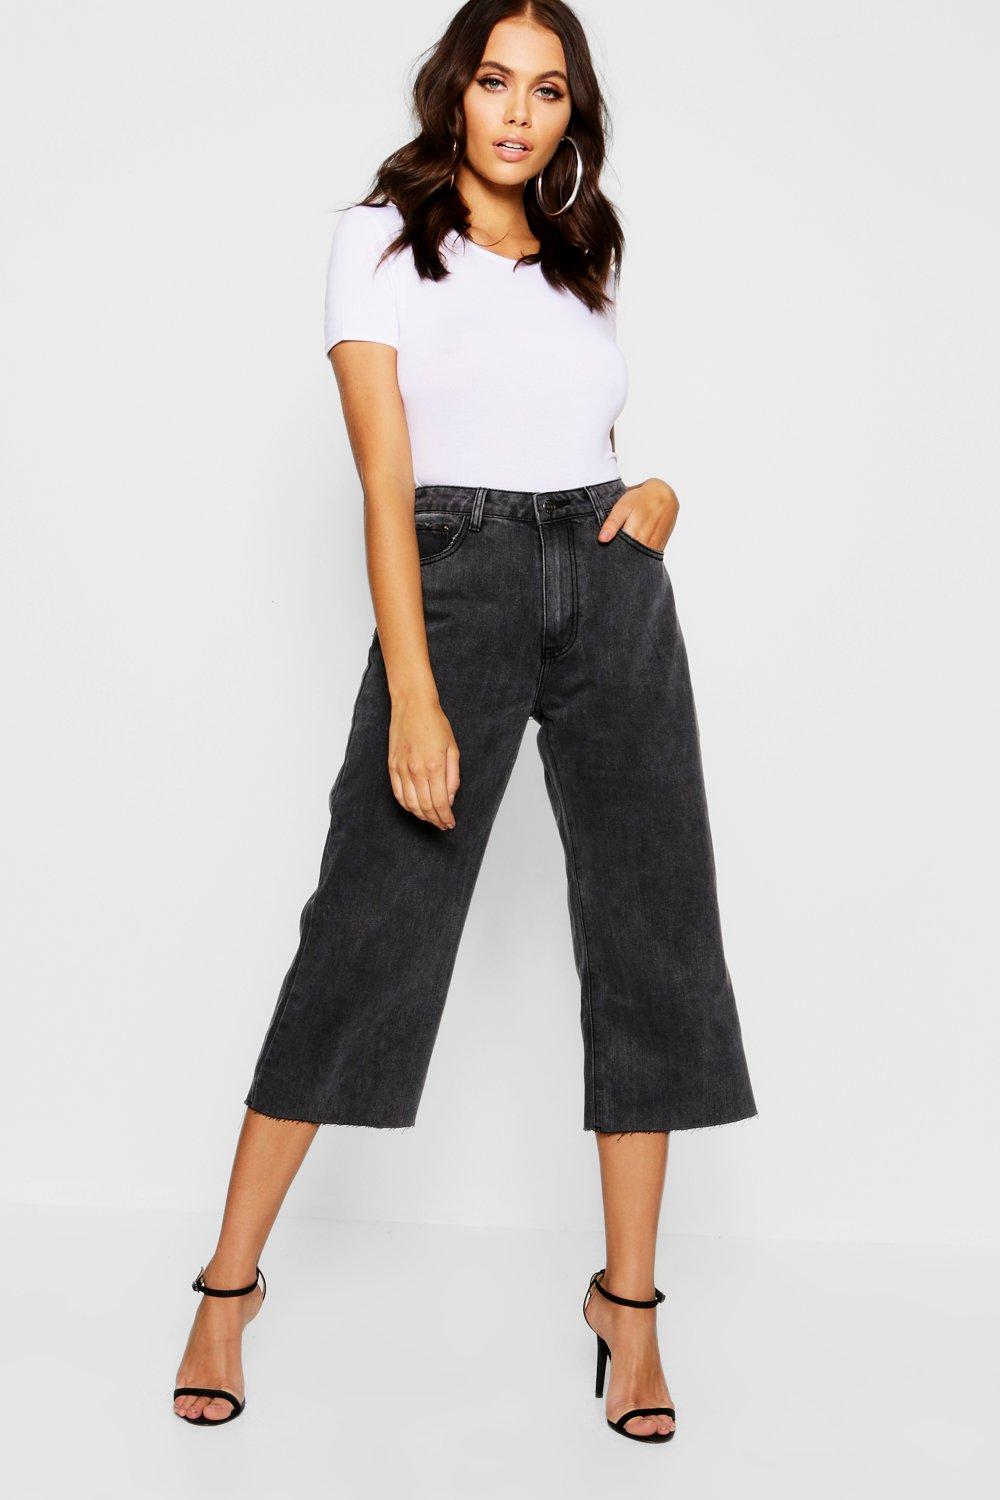 boohoo cropped jeans